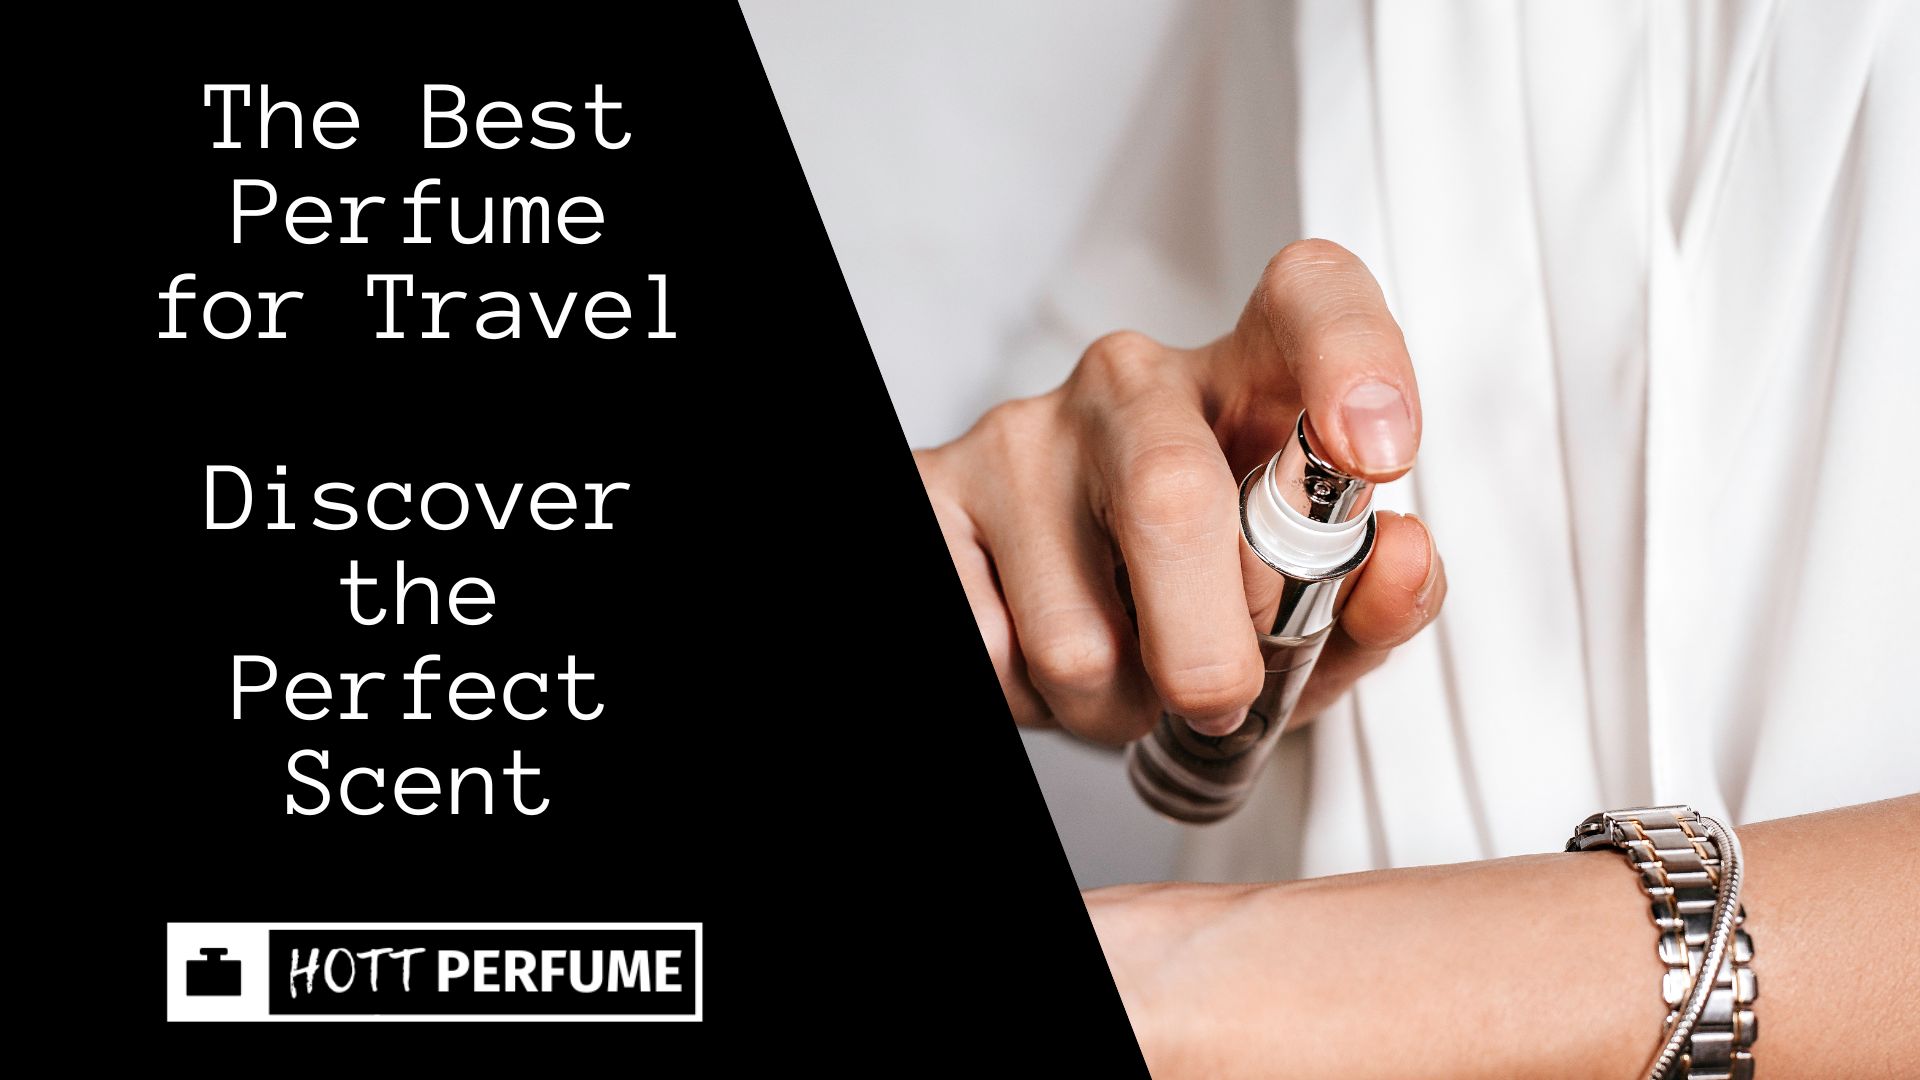 The Best Perfume for Travel